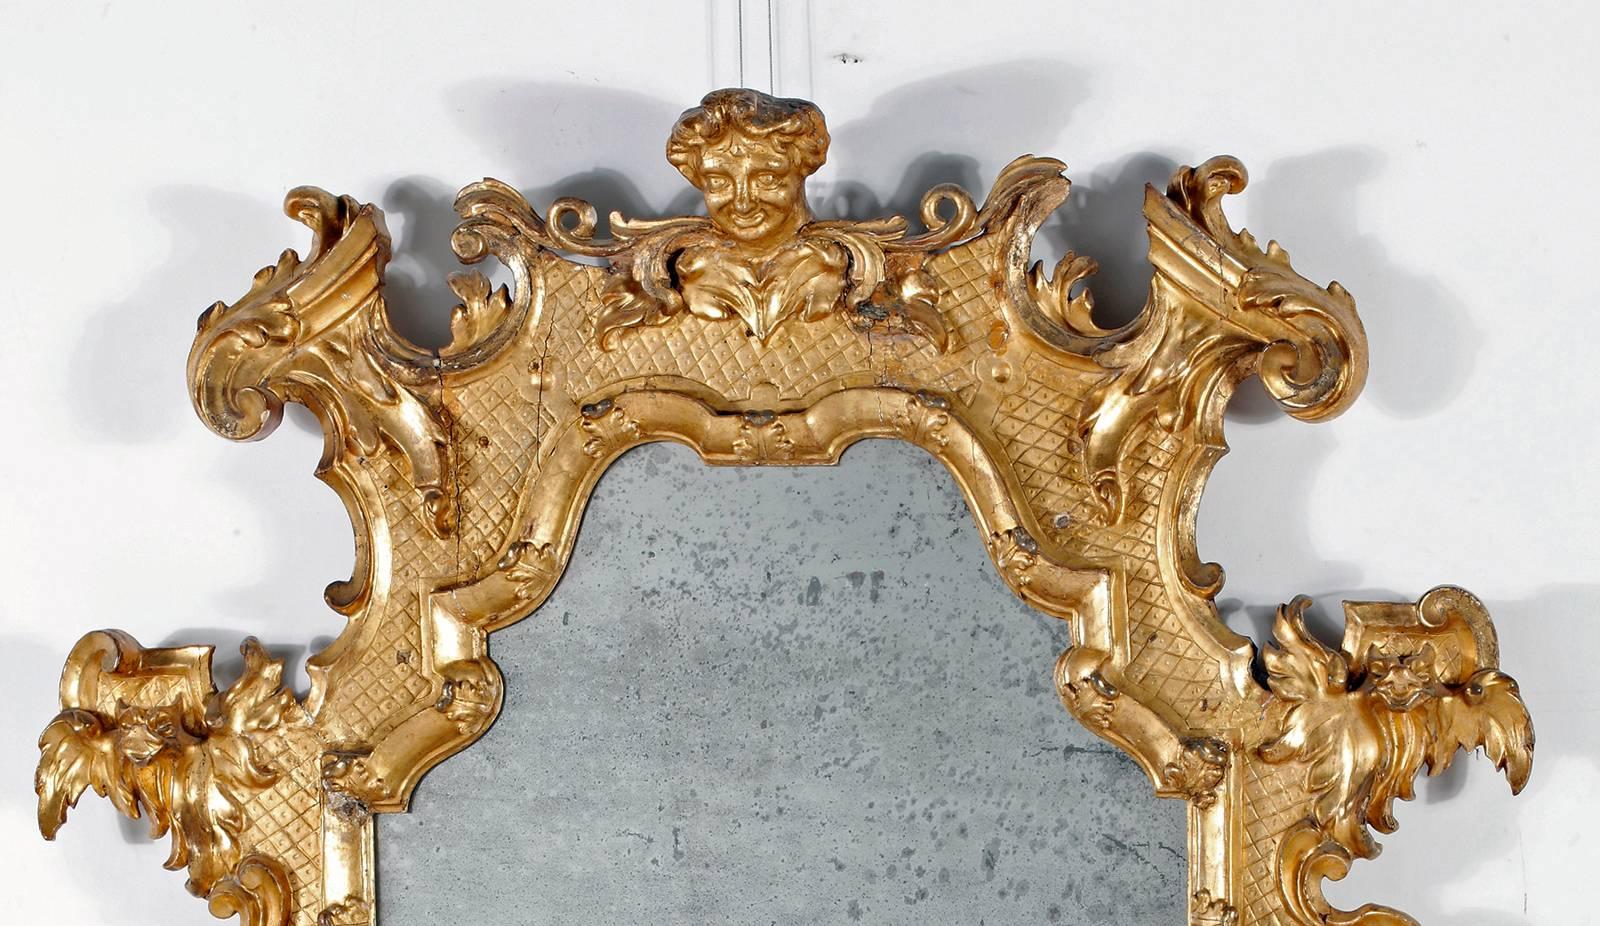 Fine & Rare Gilt-wood Mirror
Mid 18th Century (possibly English )

The oblong arched mirror plate within a molded frame carved with C-scrolls and foliage, surmounted with an elaborate crest and a central mask 

Height 52in.  Width 40in.

Provenance: